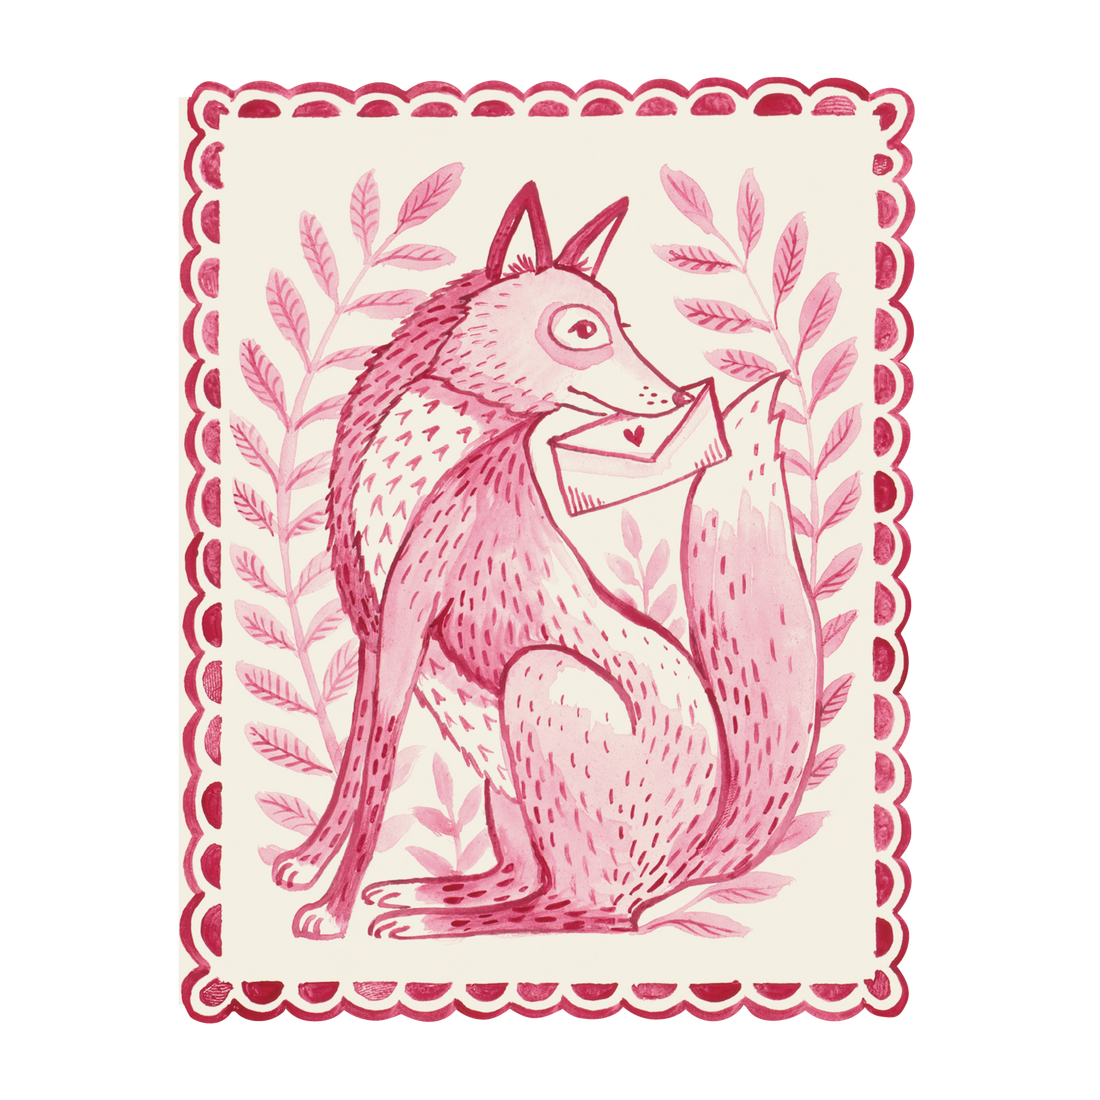 A monochrome red watercolor illustration of a stylized fox holding a heart-sealed letter in its mouth, surrounded by a die-cut frame resembling the edges of a postage stamp.